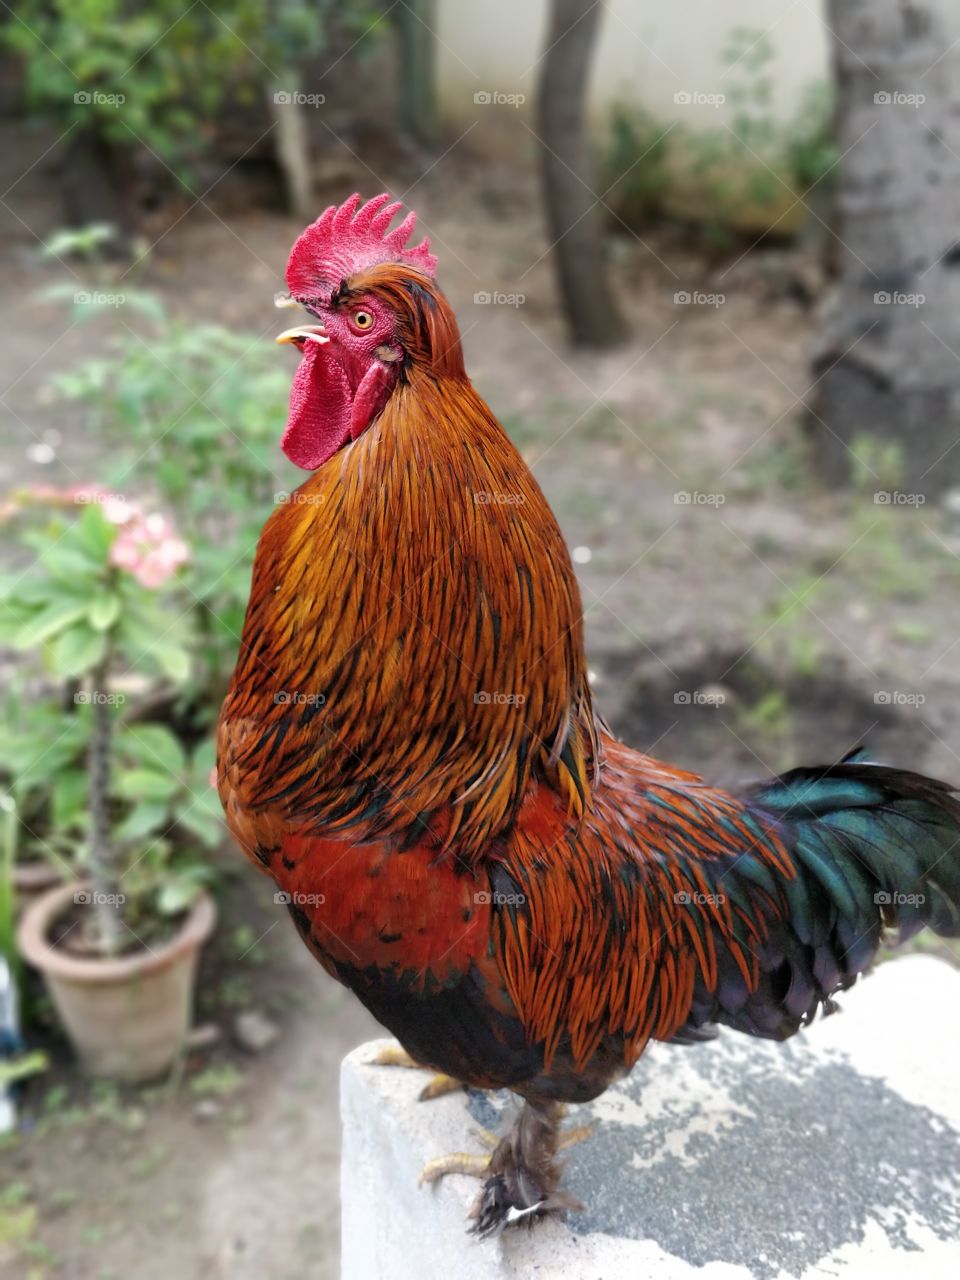 The Emperor of the Backyard with his red crown. The Perfect Dictator!